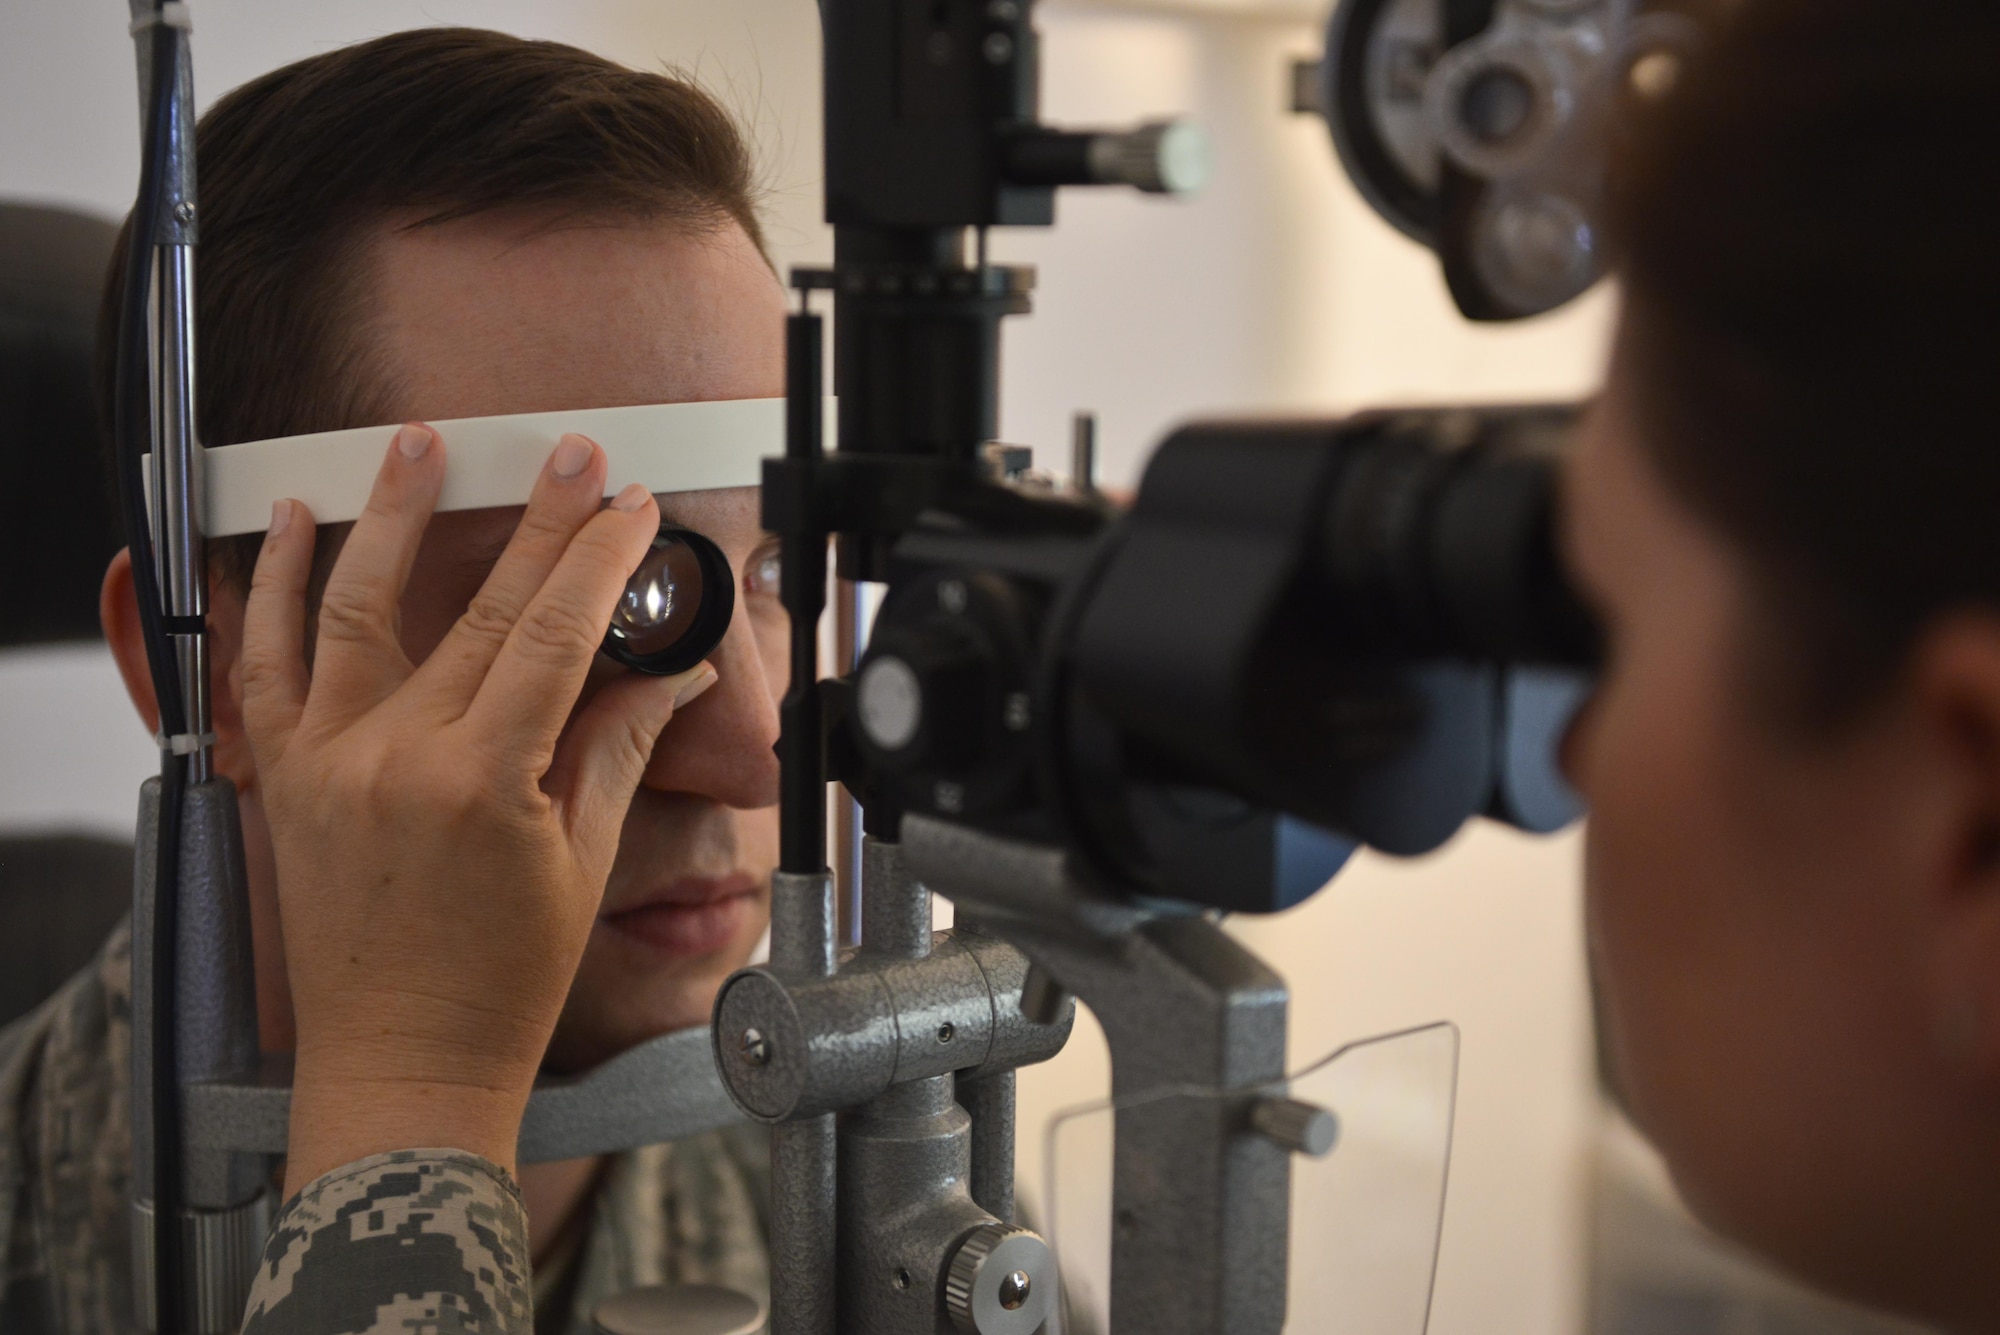 Capt. Lauren Matthews, 379th Expeditionary Medical Group optometry clinic, looks at a magnified 3-D view of a patient’s eye during a Slit-Lamp exam August 7, 2015 at Al Udeid Air Base, Qatar. (U.S. Air Force photo/Staff Sgt. Alexandre Montes)